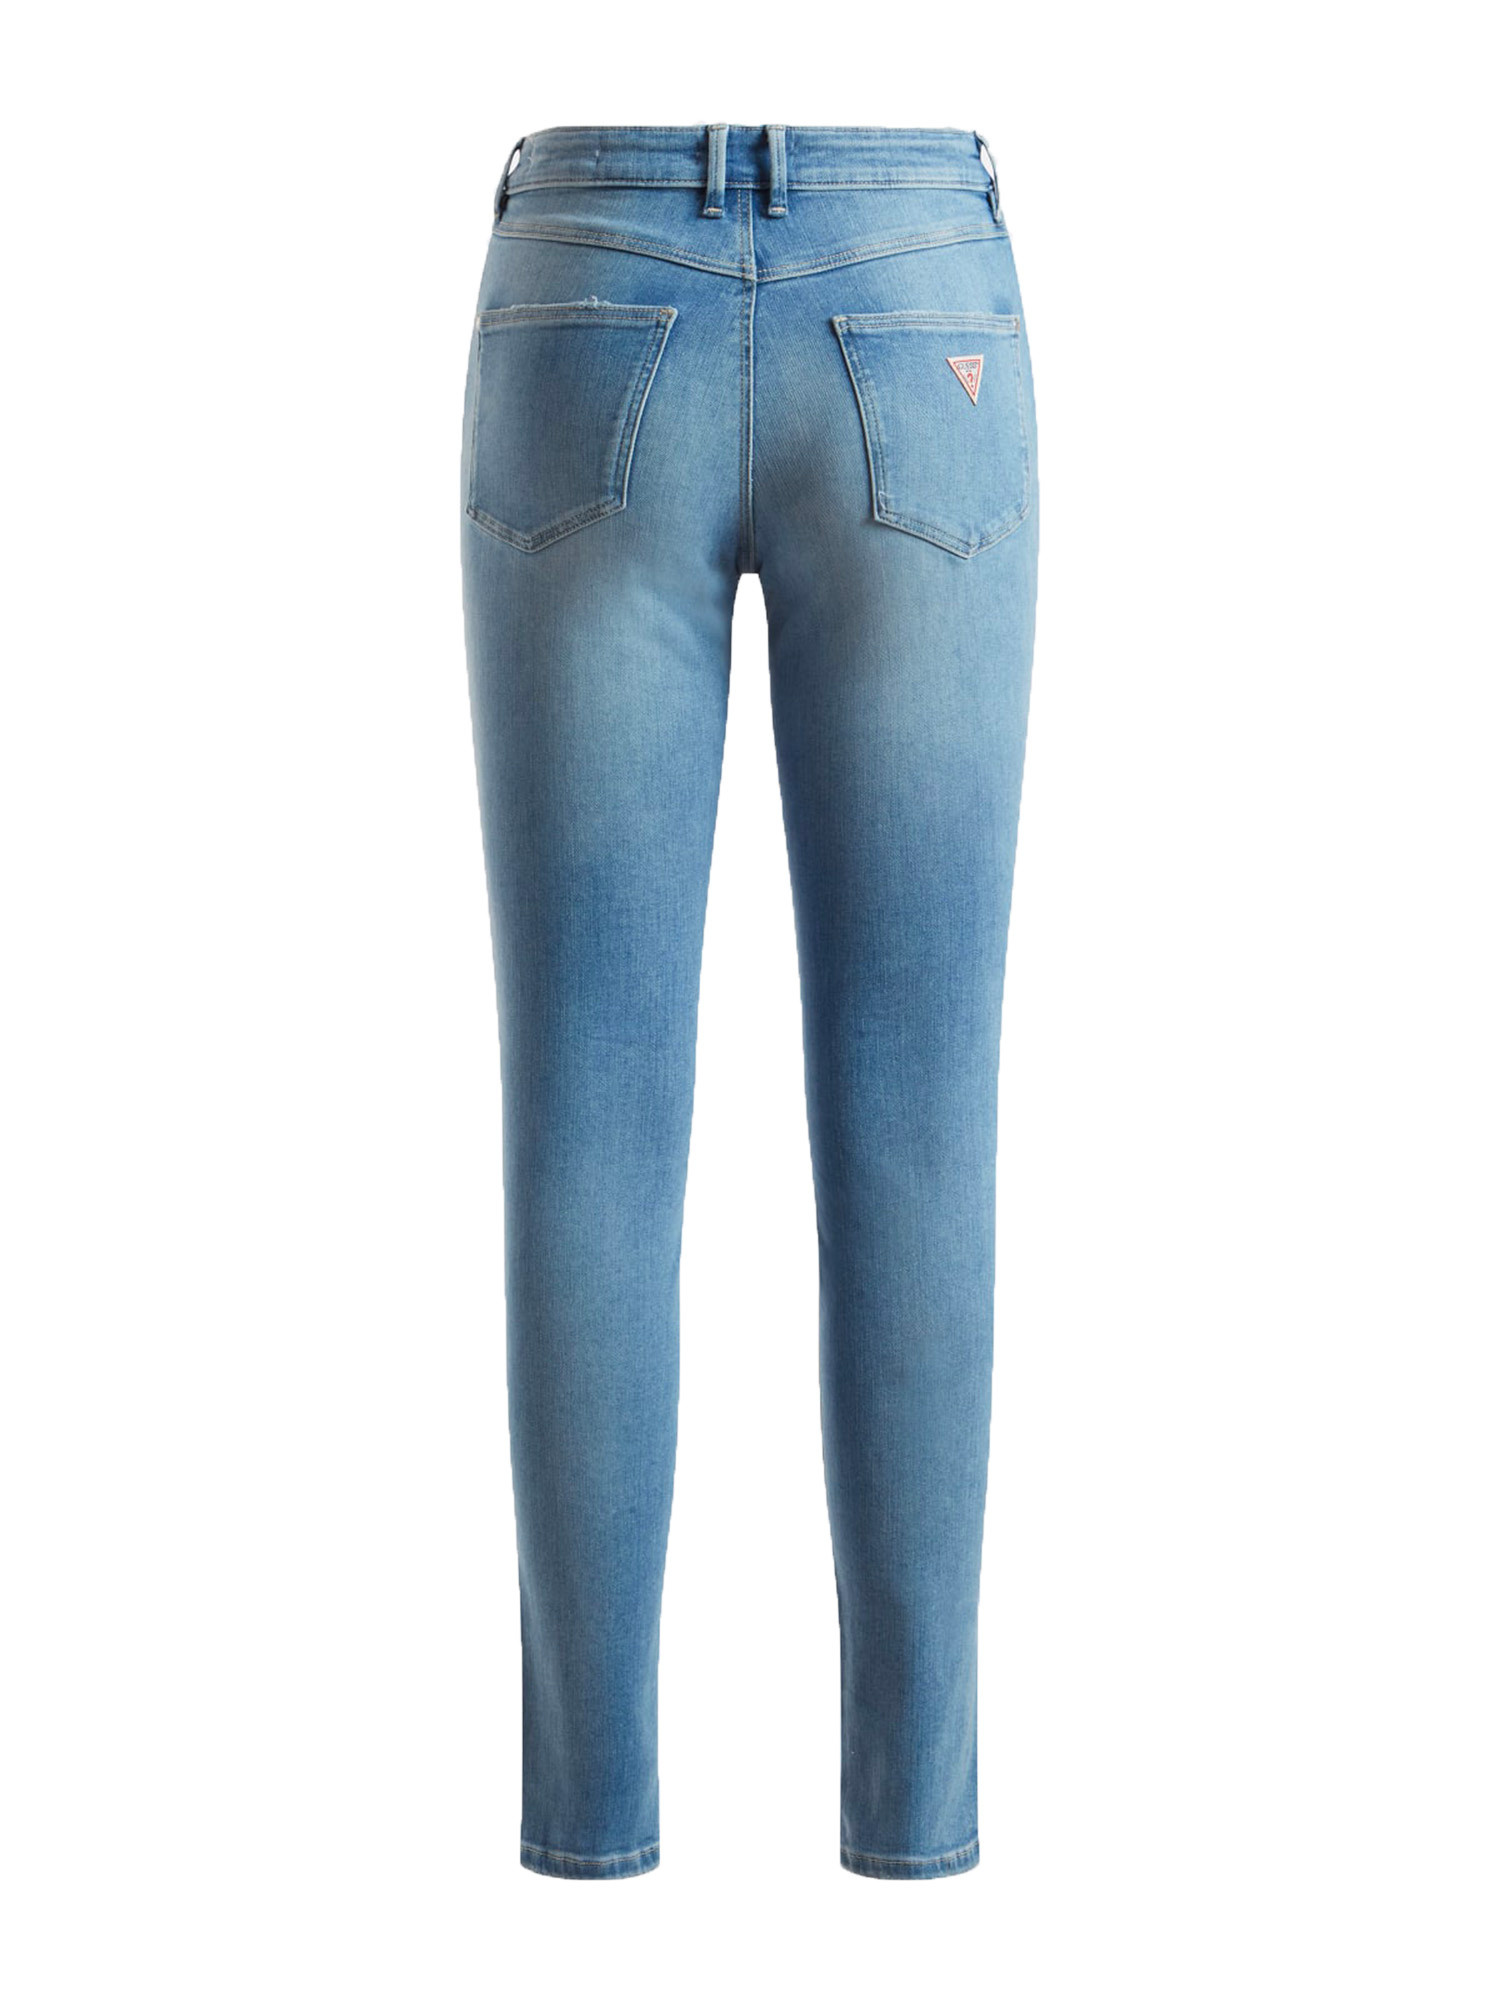 Guess - Jeans 5 tasche skinny, Azzurro, large image number 1